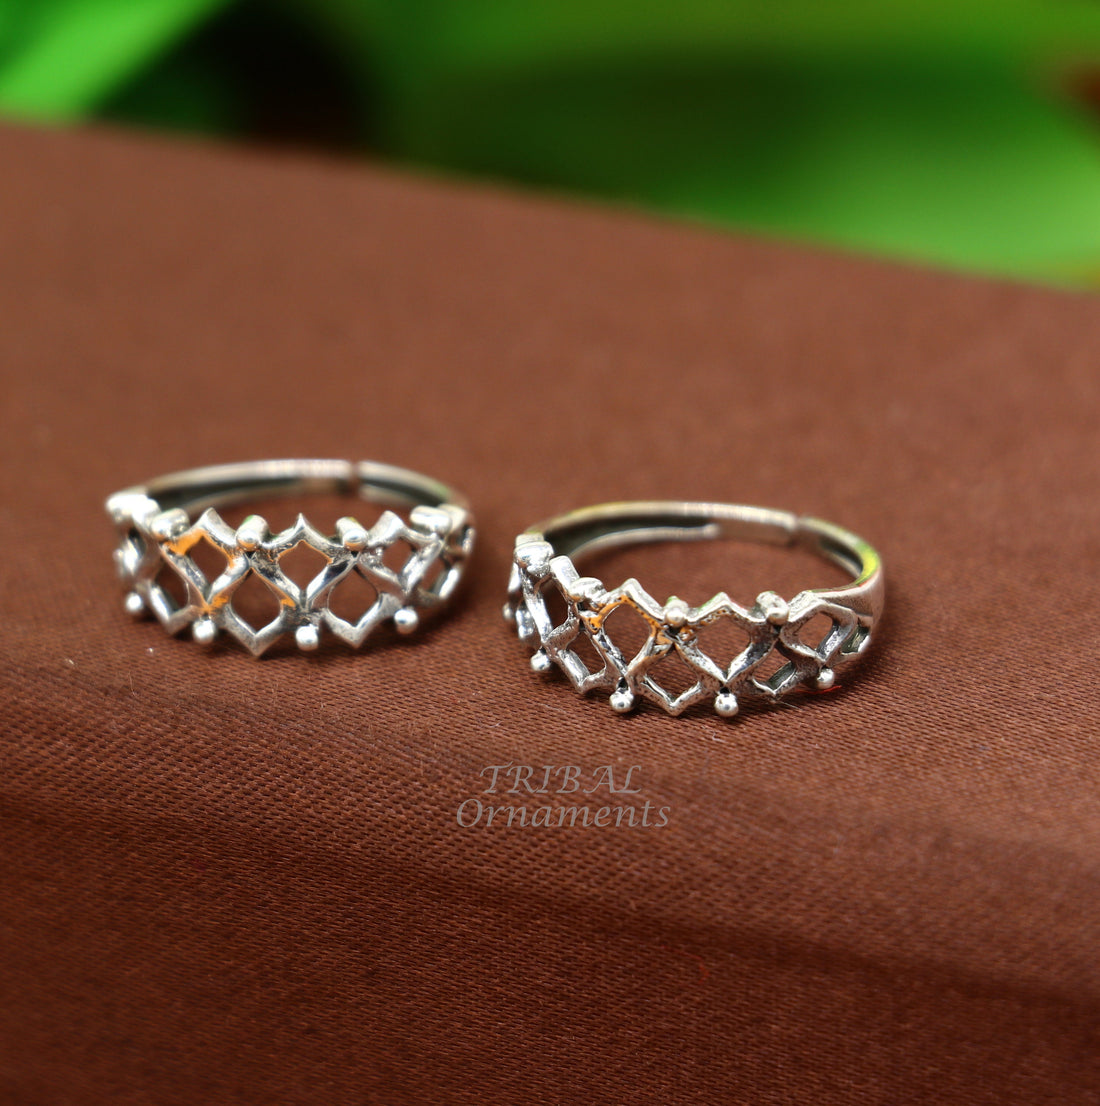 925 sterling silver handcrafted unique design vintage ethnic design brides toe ring for girl's women's ytr27 - TRIBAL ORNAMENTS